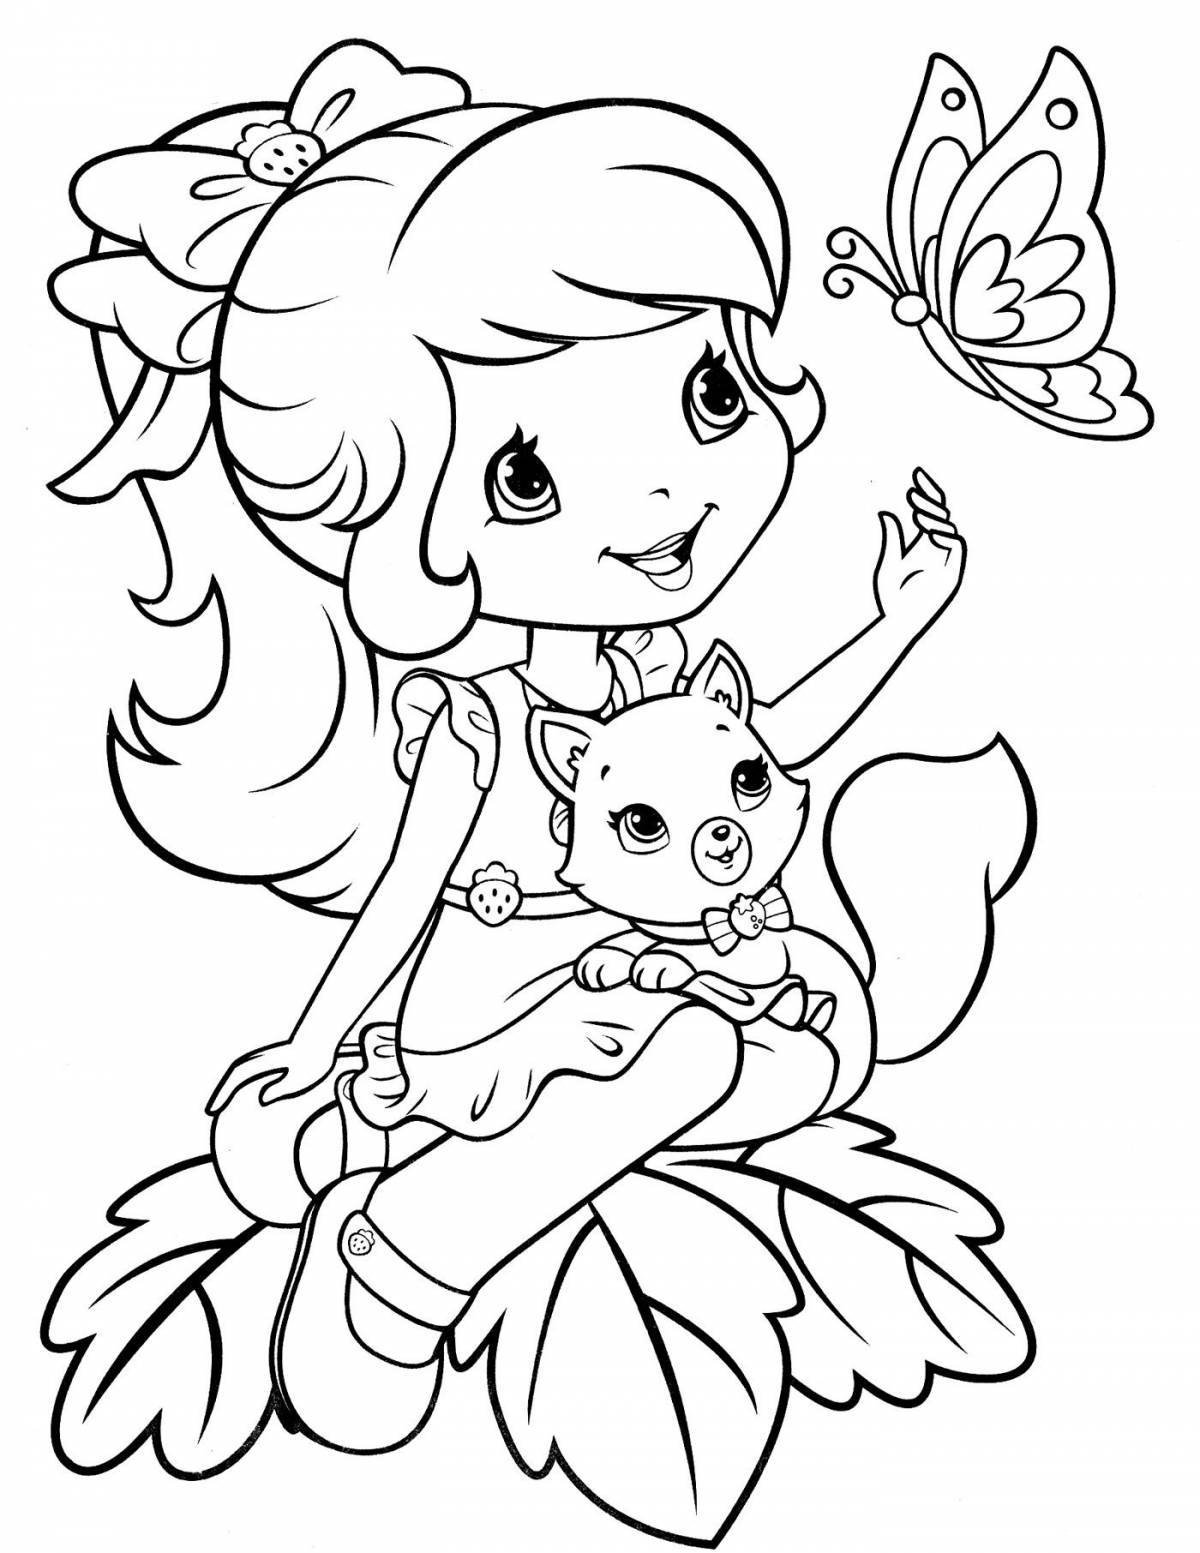 Inspirational coloring pages for girls